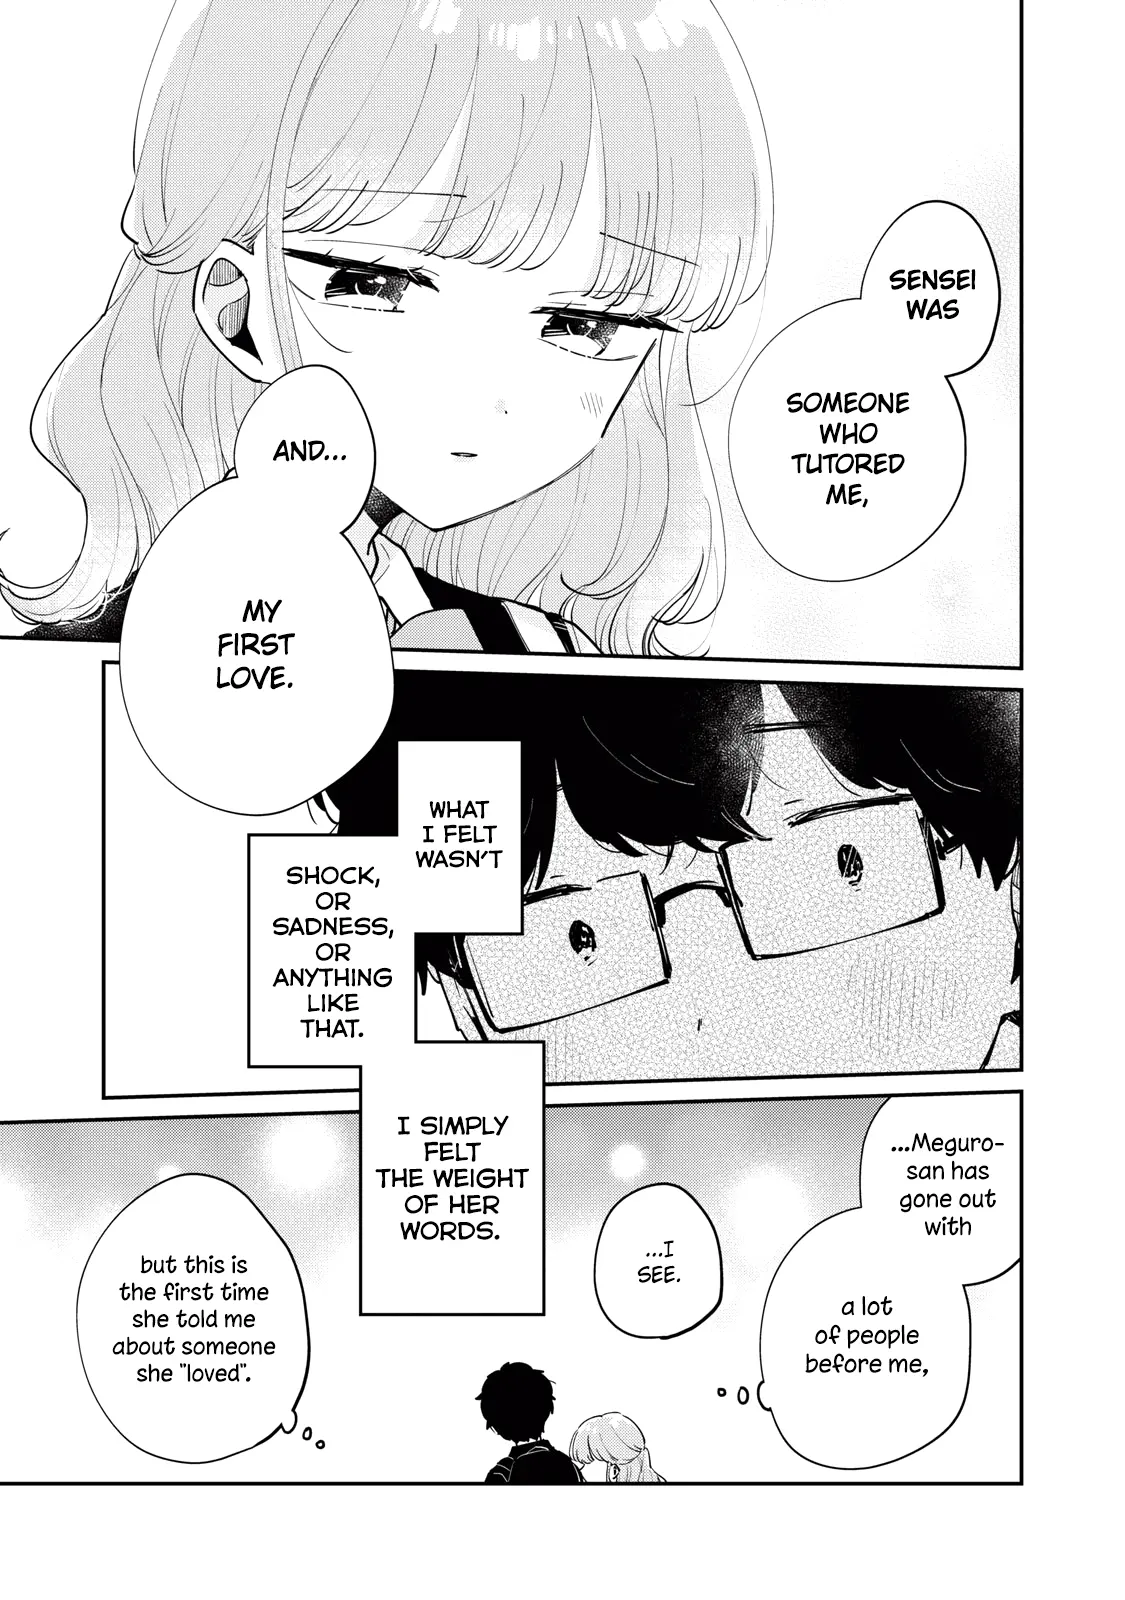 It's Not Meguro-San's First Time - 74 page 6-cd088e0c